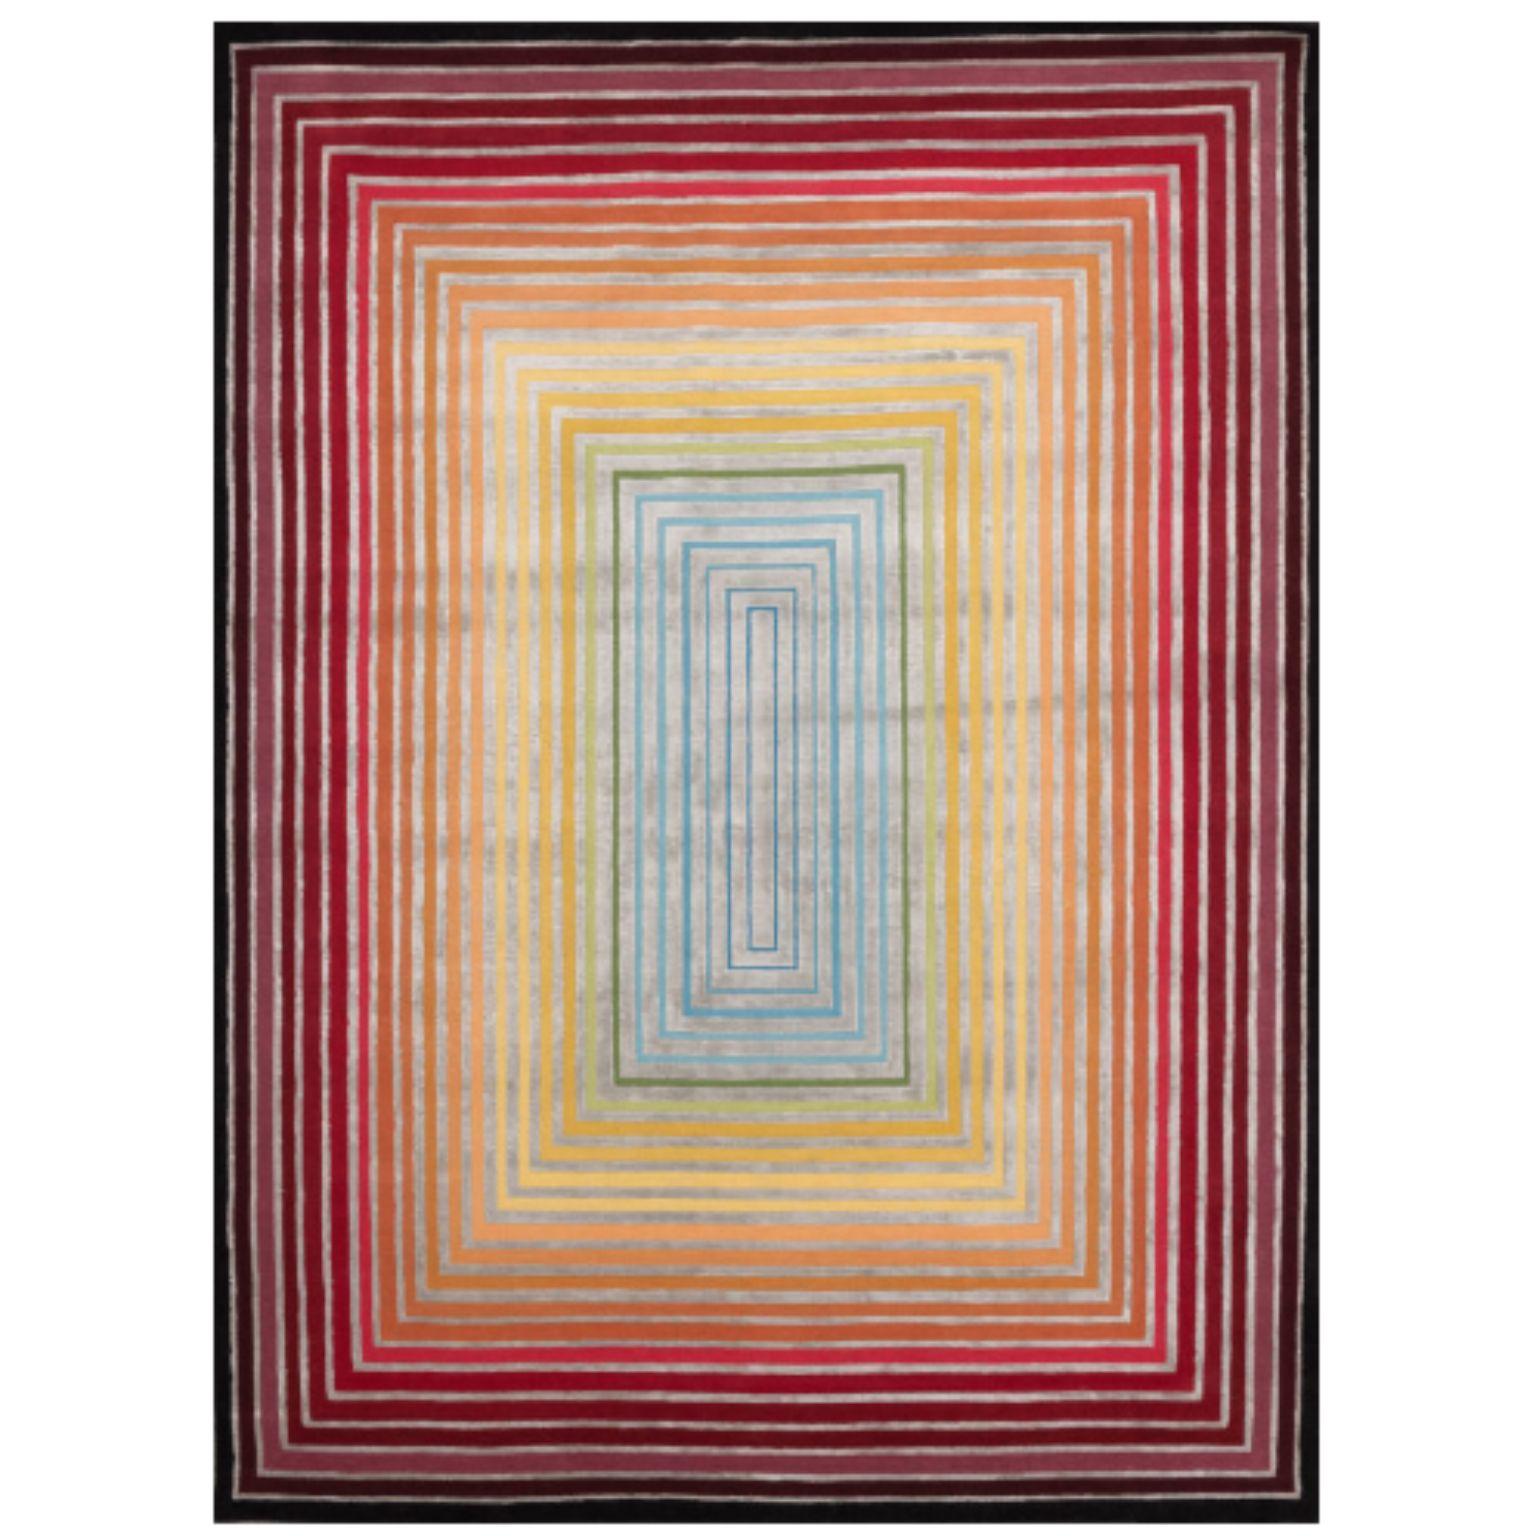 REHAB 200 rug by Illulian
Dimensions: D300 x H200 cm 
Materials: wool 50% , silk 50%
Variations available and prices may vary according to materials and sizes. 

Illulian, historic and prestigious rug company brand, internationally renowned in